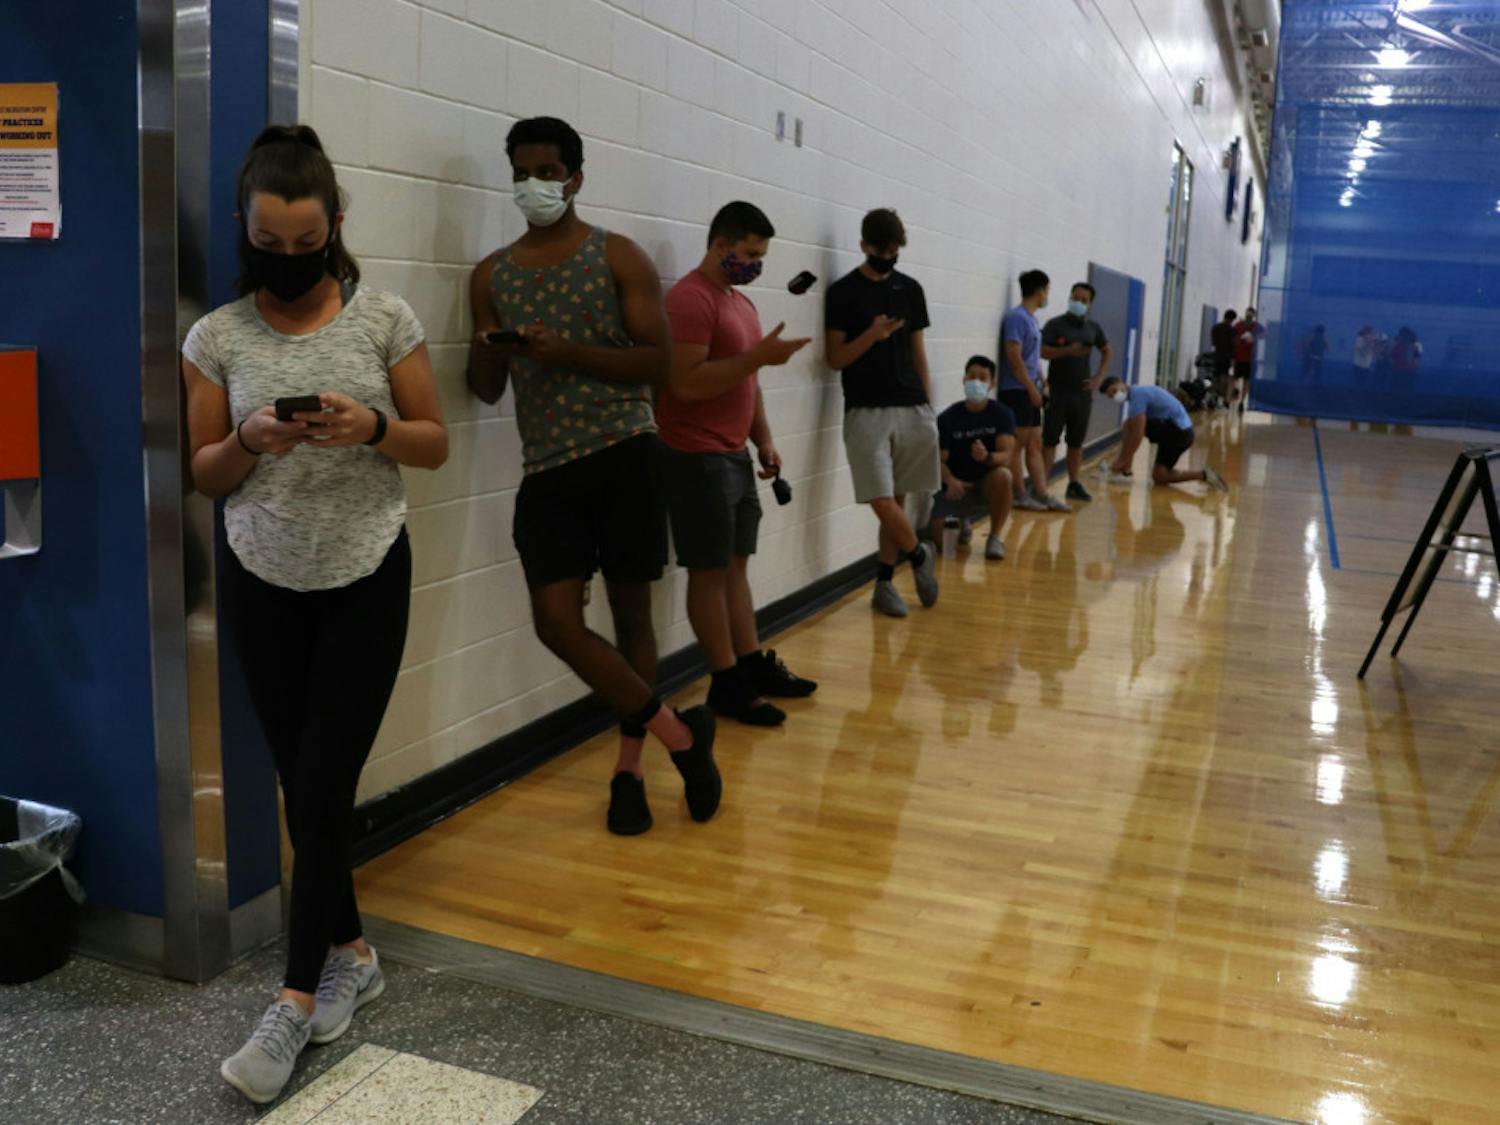 People stand in line to enter the weight room at the Southwest Recreation Center in Gainesville on Monday night, Sept. 21, 2020. According to recsports.ufl.edu, the weight room is open at limited capacity, however the website does not state how many people are allowed at one time.